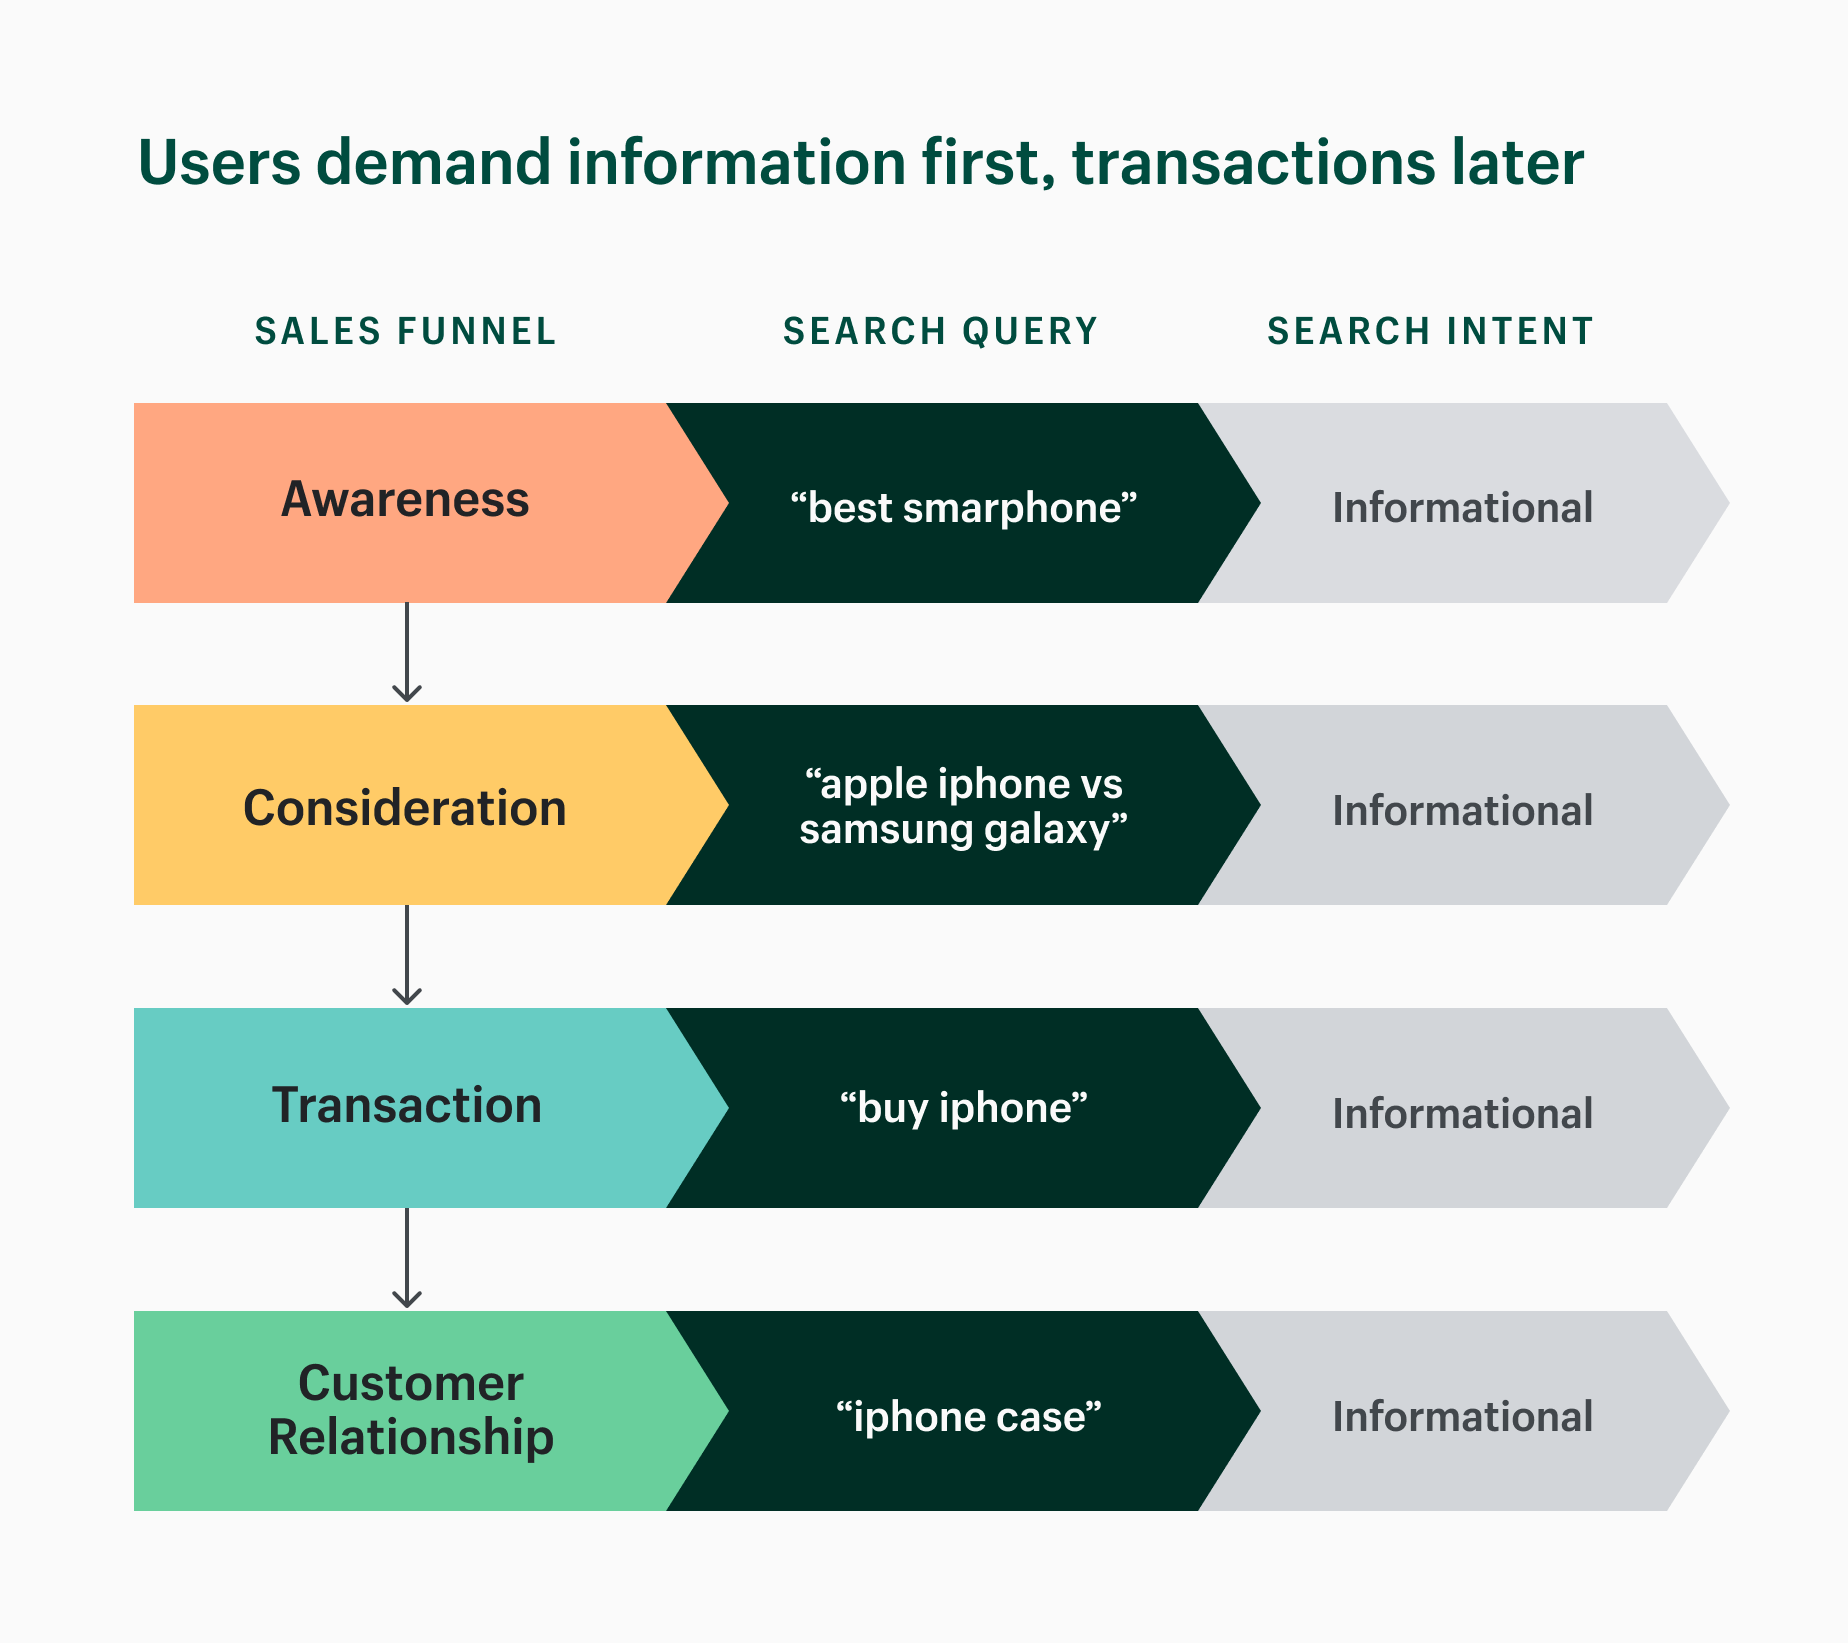 Image showing how search queries take your down the sales funnel from informational searches to transactional searches as a consumer